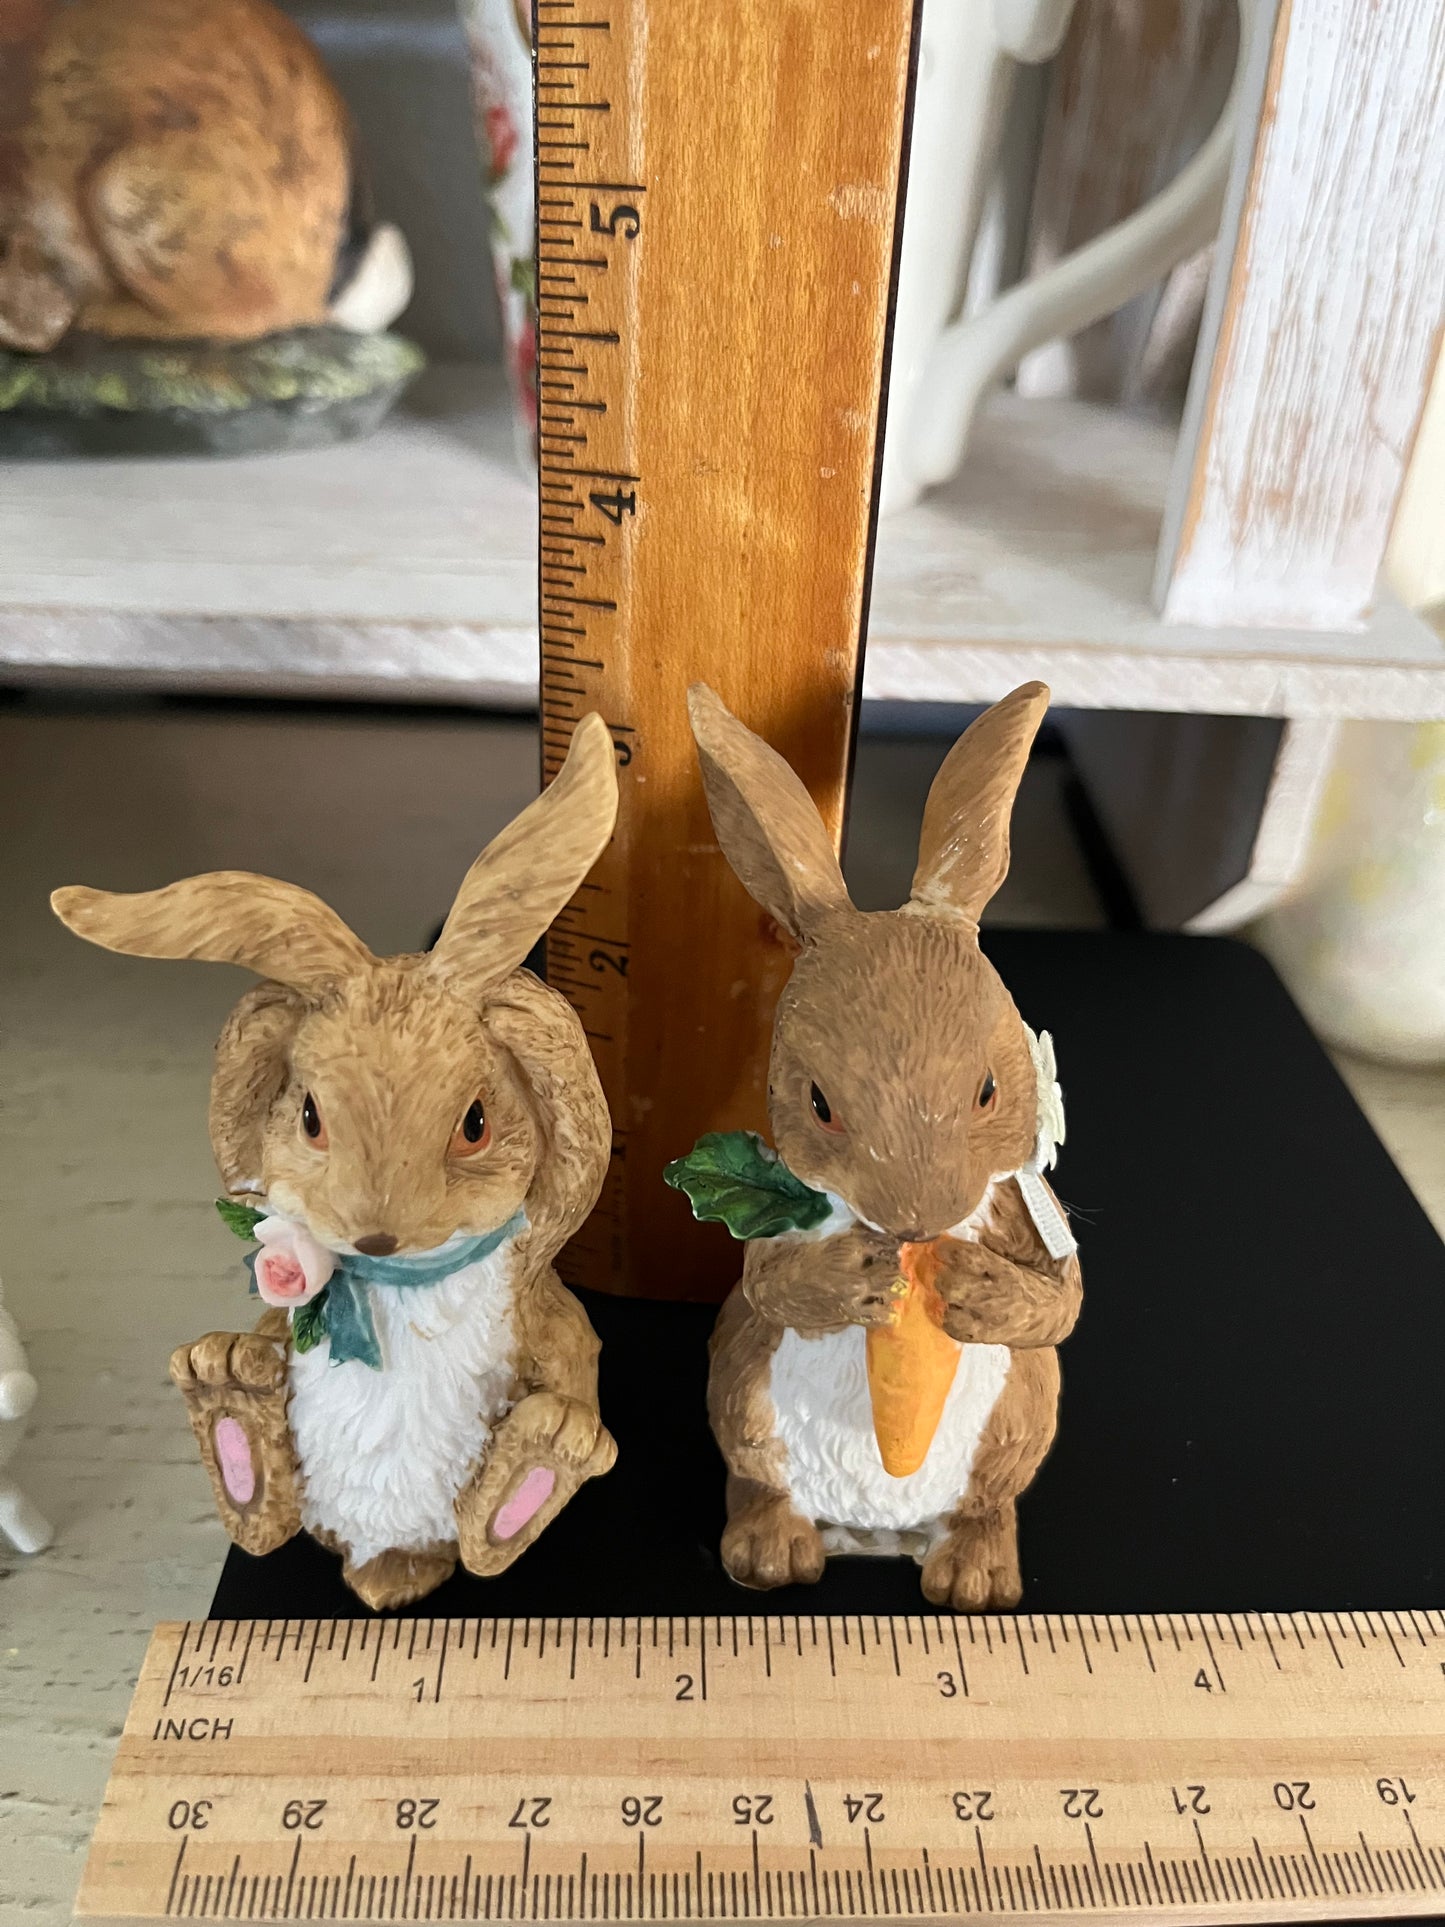 Adorable Resin Brown Bunny Figurines - Set of 2 Preloved Collectibles